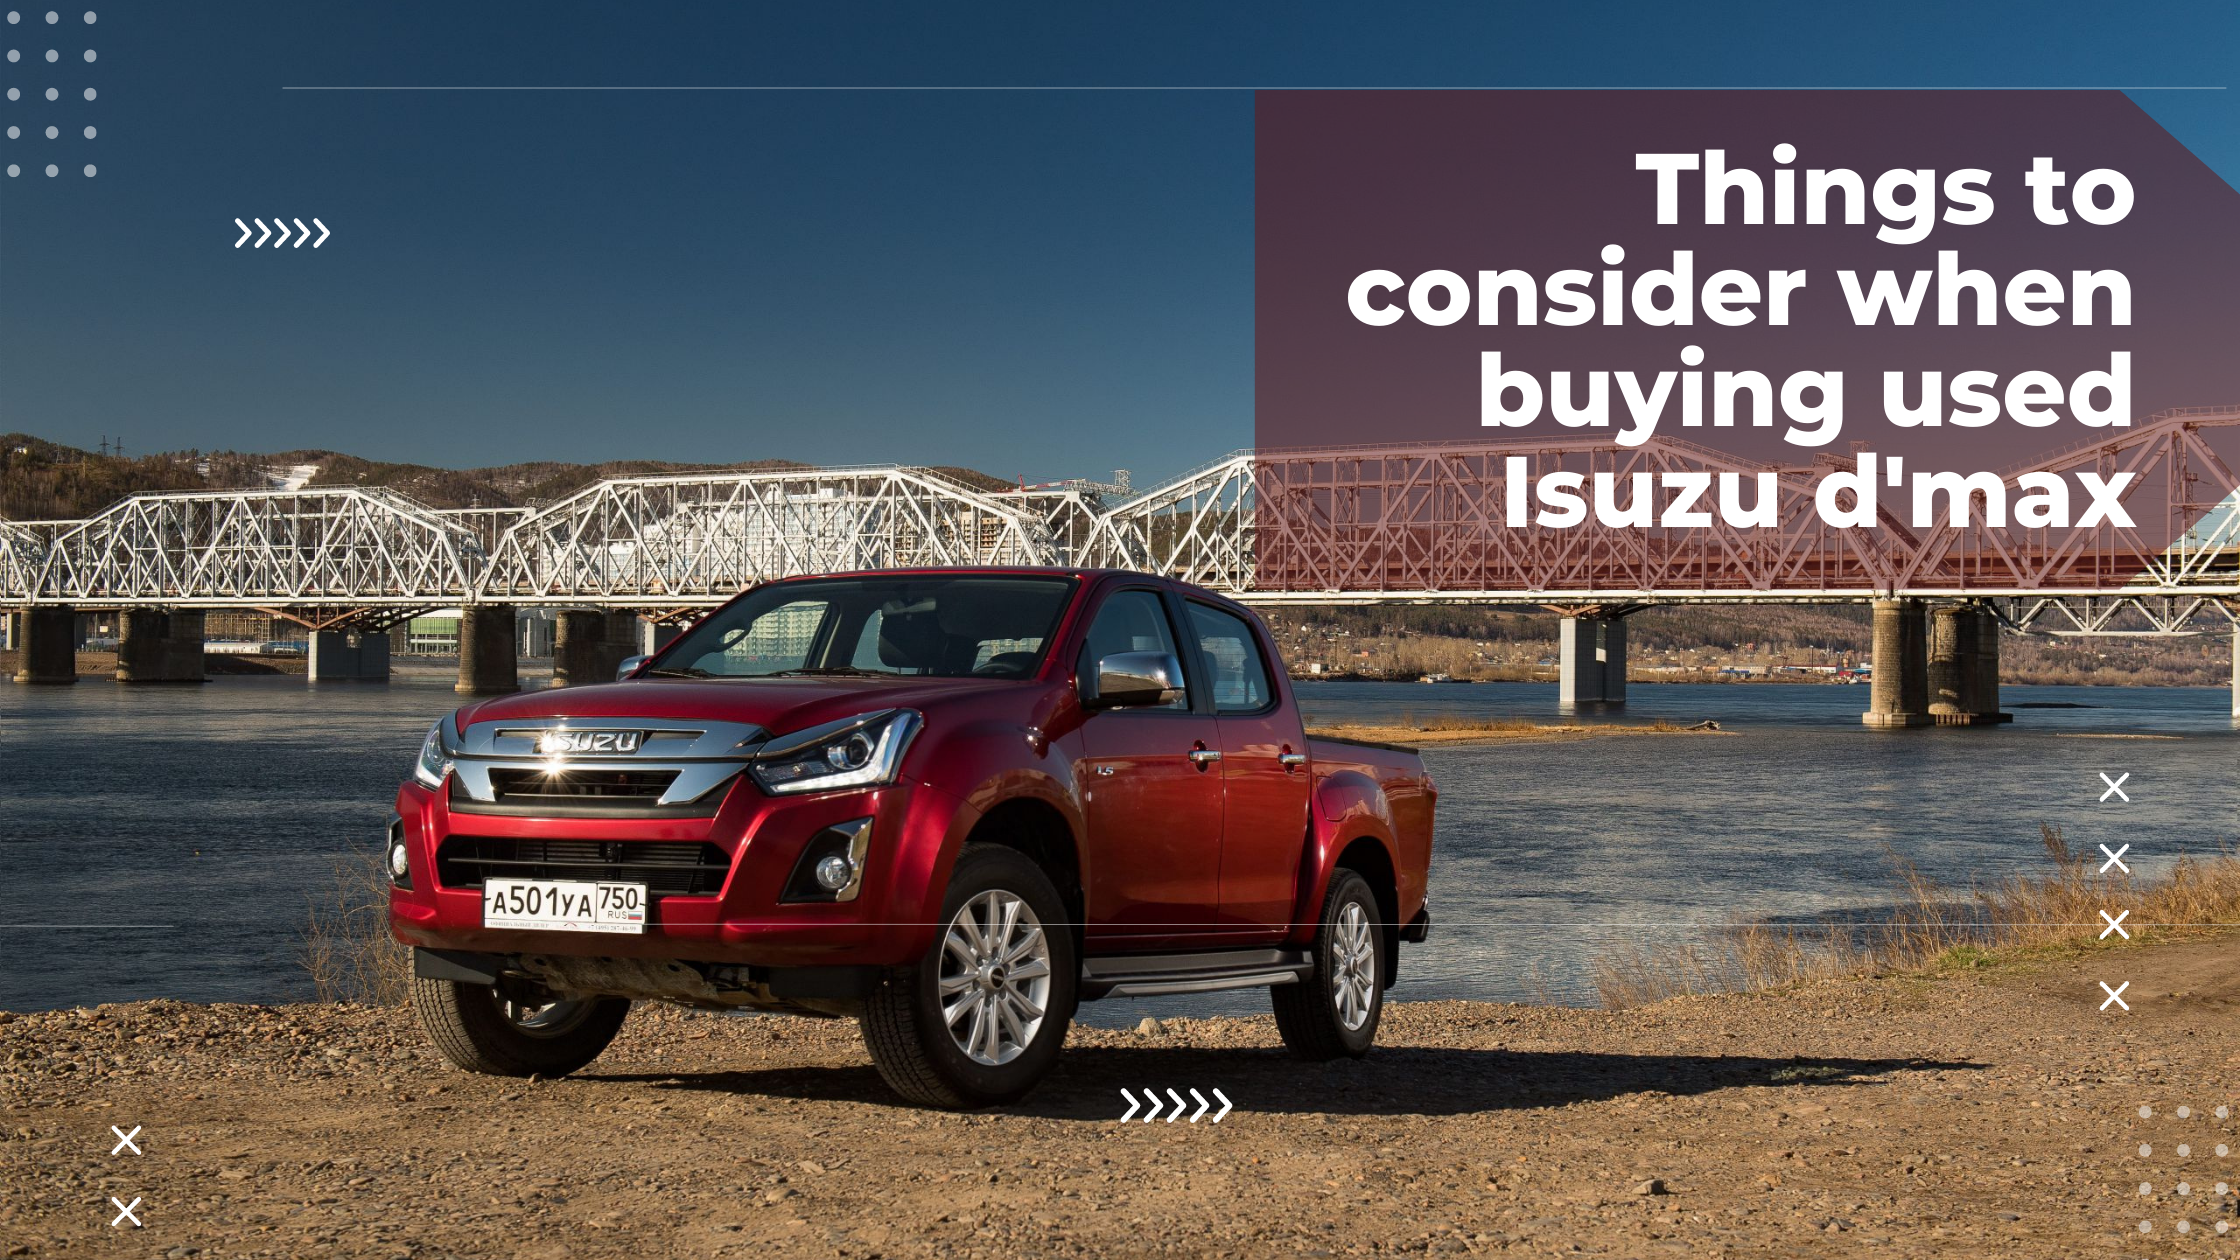 Things to consider when buying used Isuzu d'max